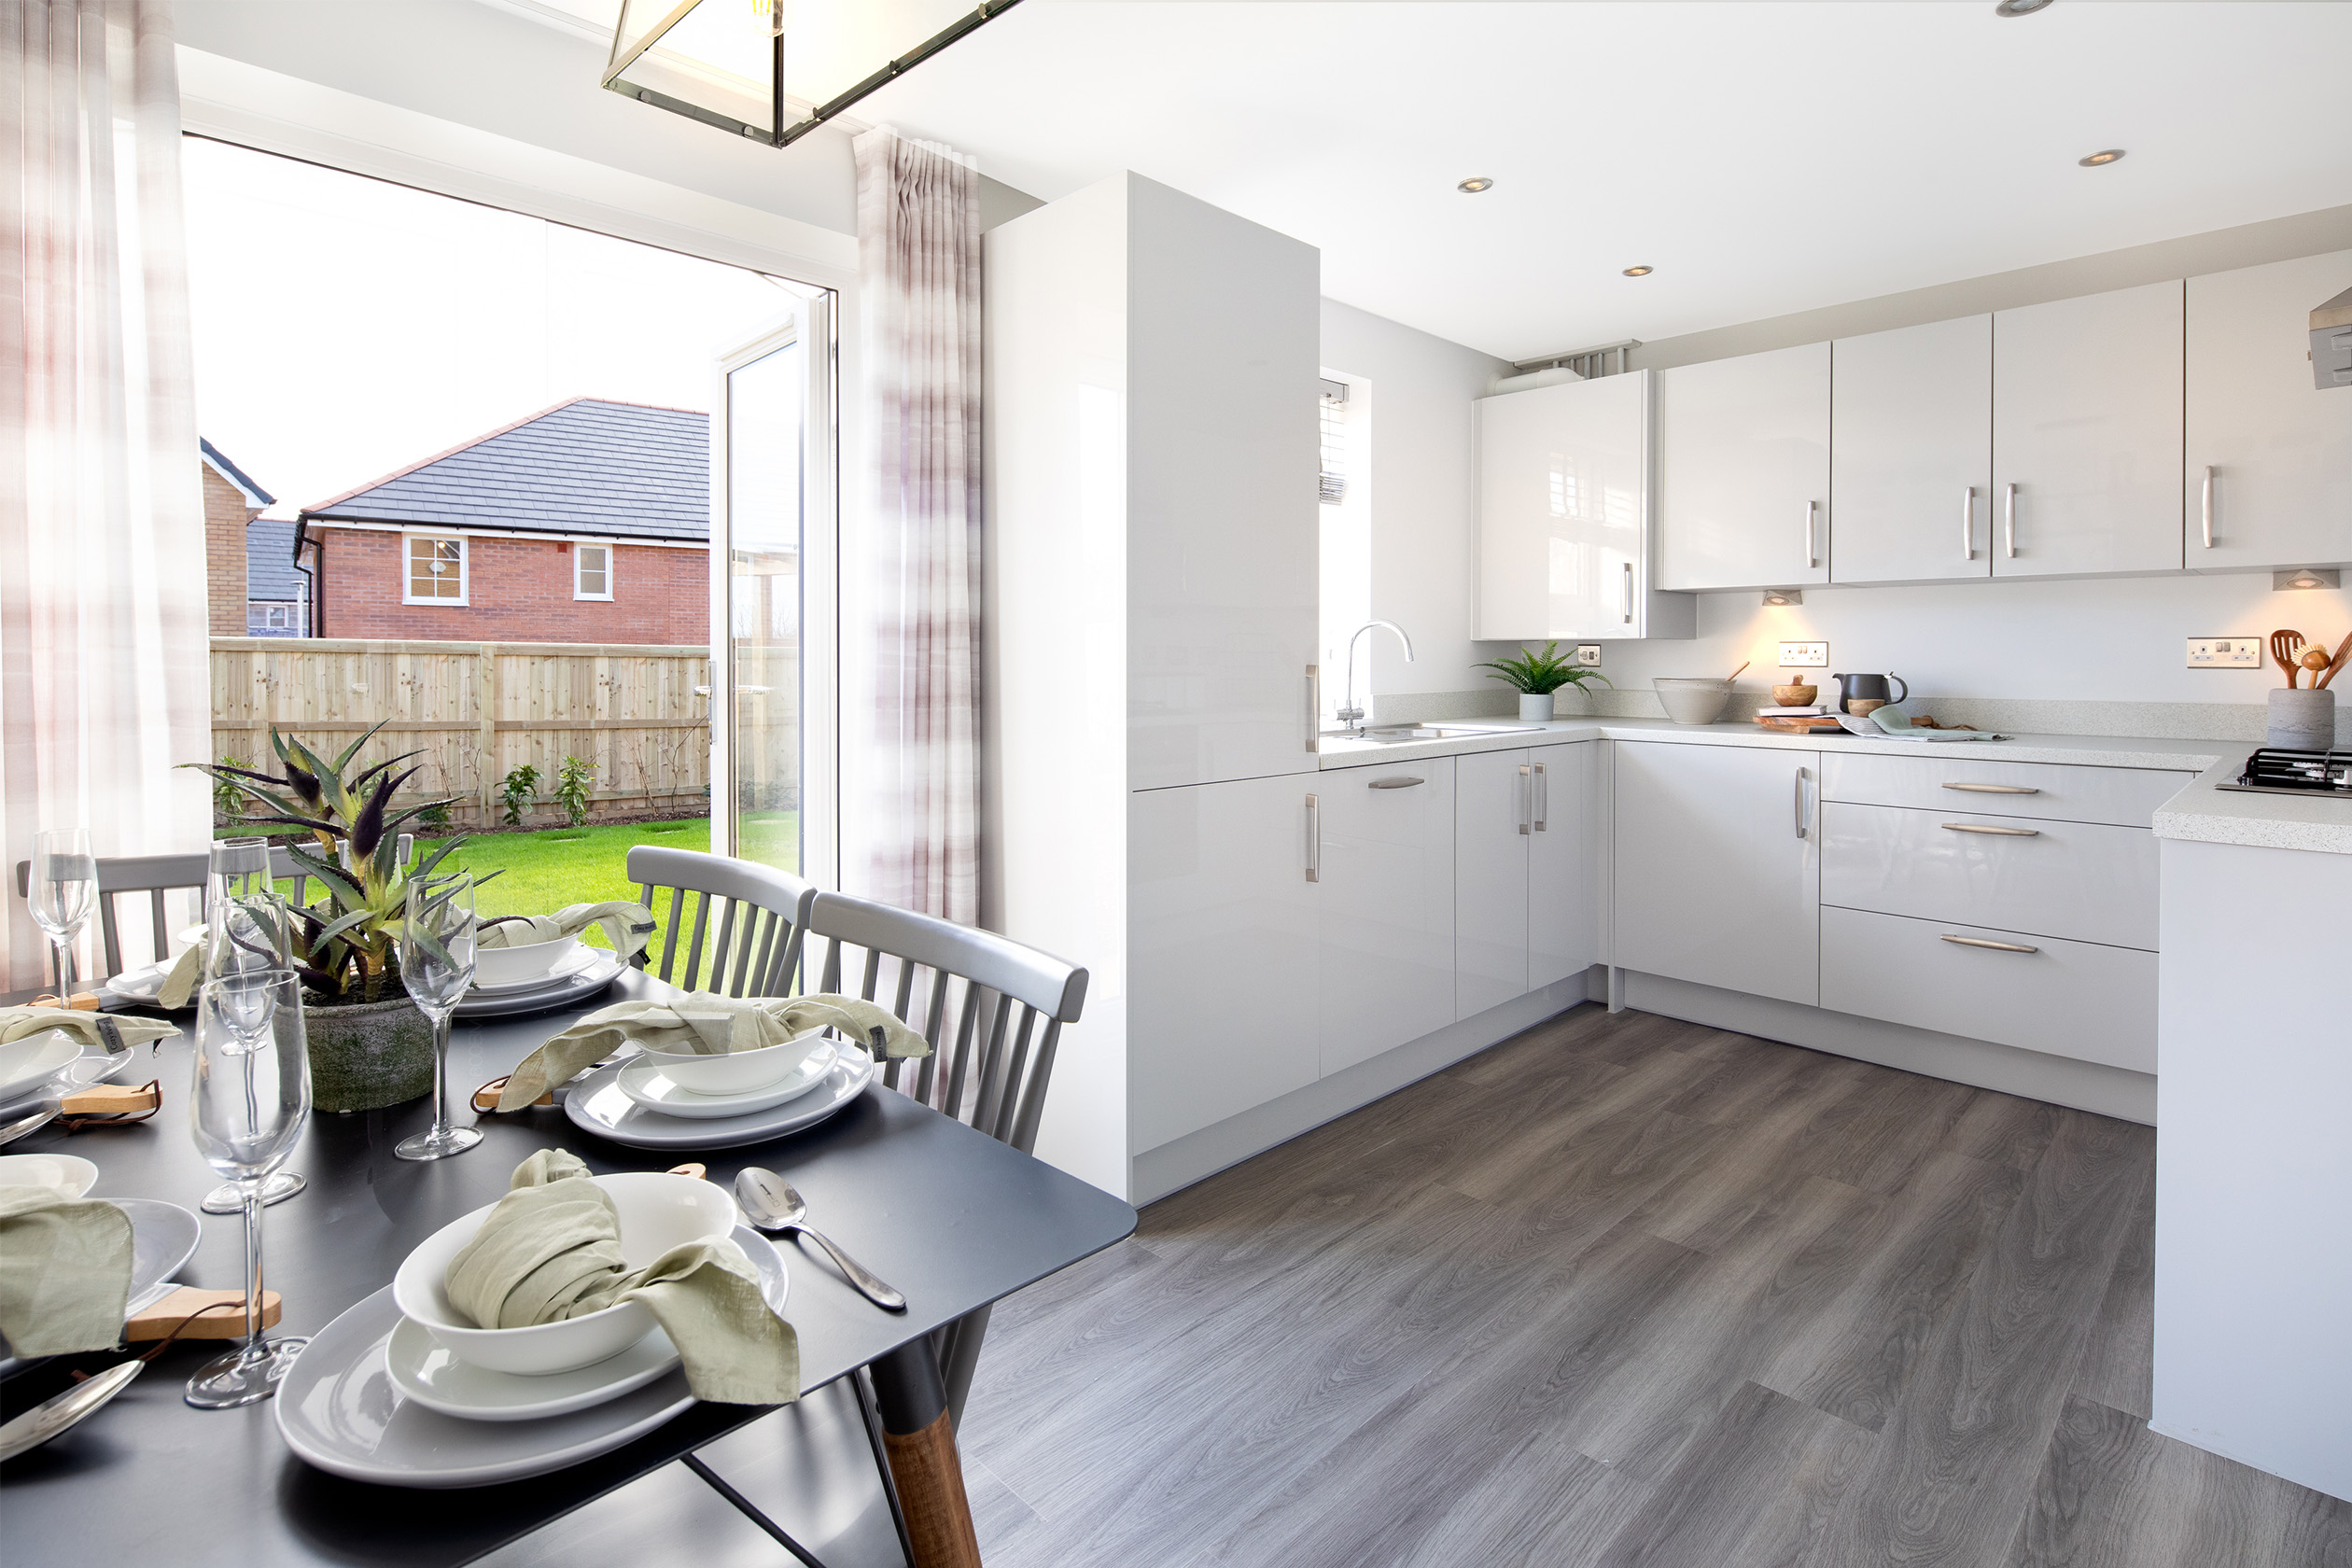 Property 3 of 9. Open Plan Kitchen With French Doors To The Garden In The Moresby 3 Bedroom Home